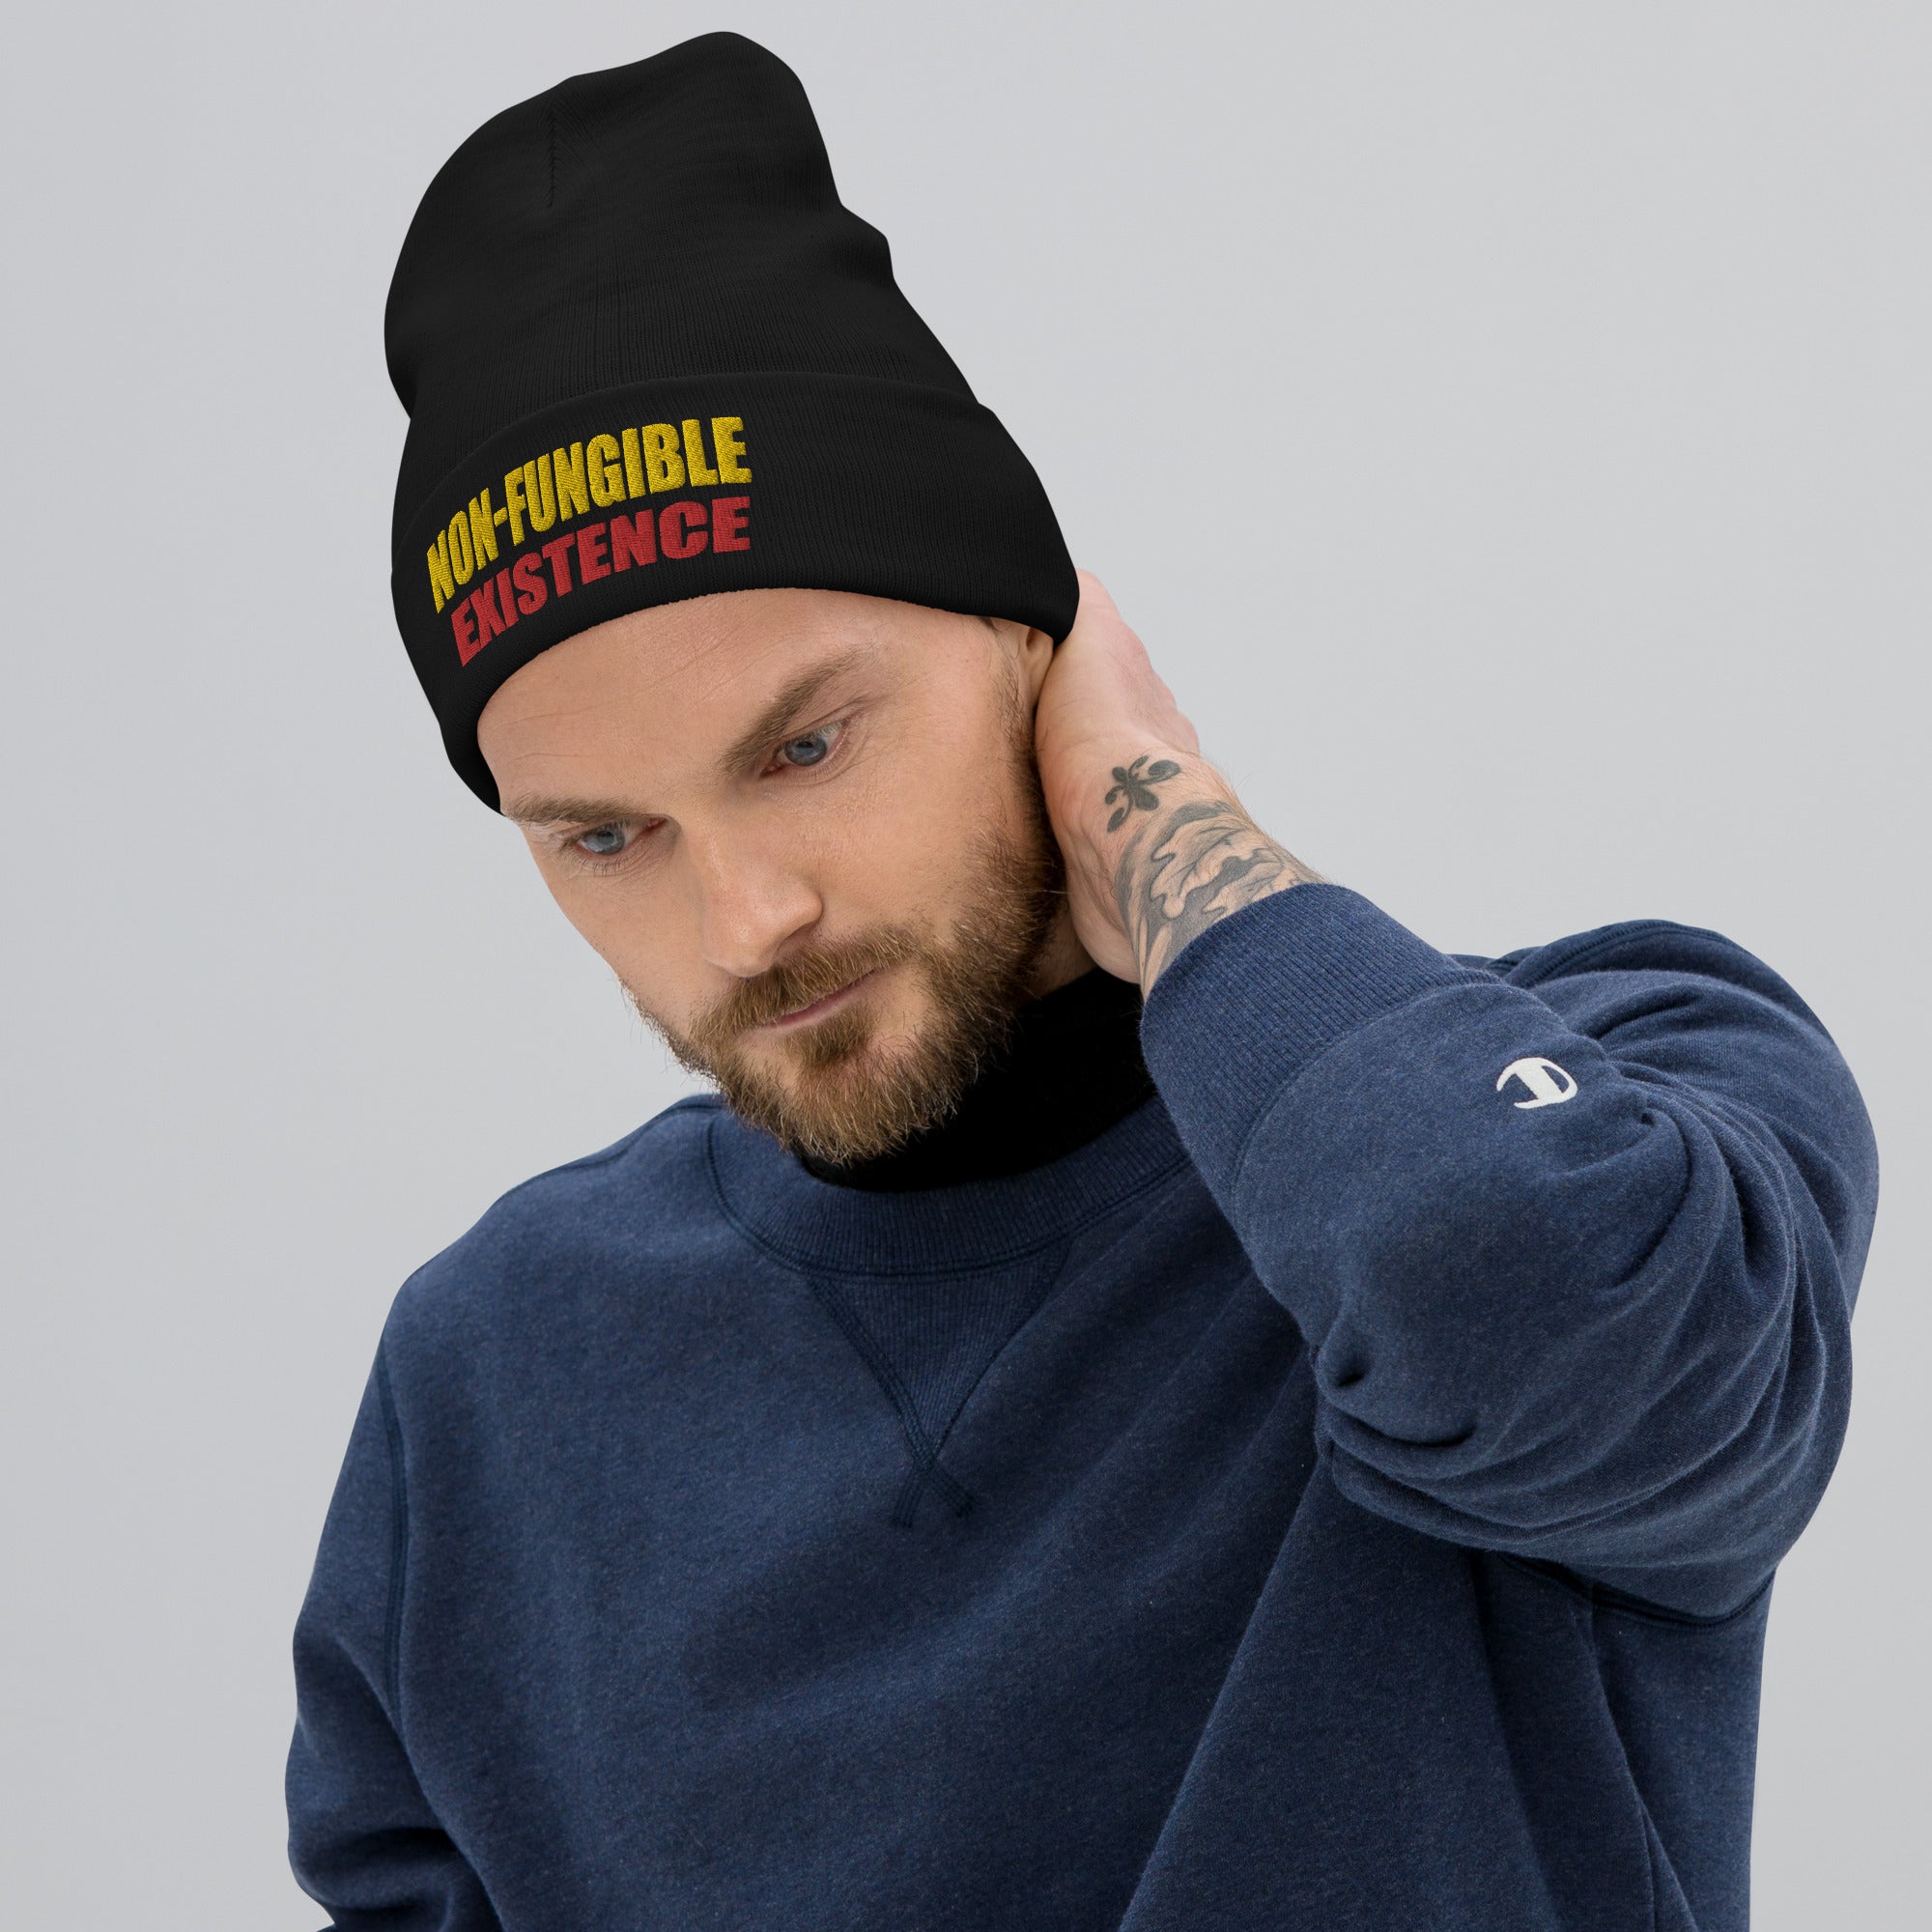 NFT Non-Fungible Existence Crypto Bitcoin Embroidered Cuff Beanie Cap